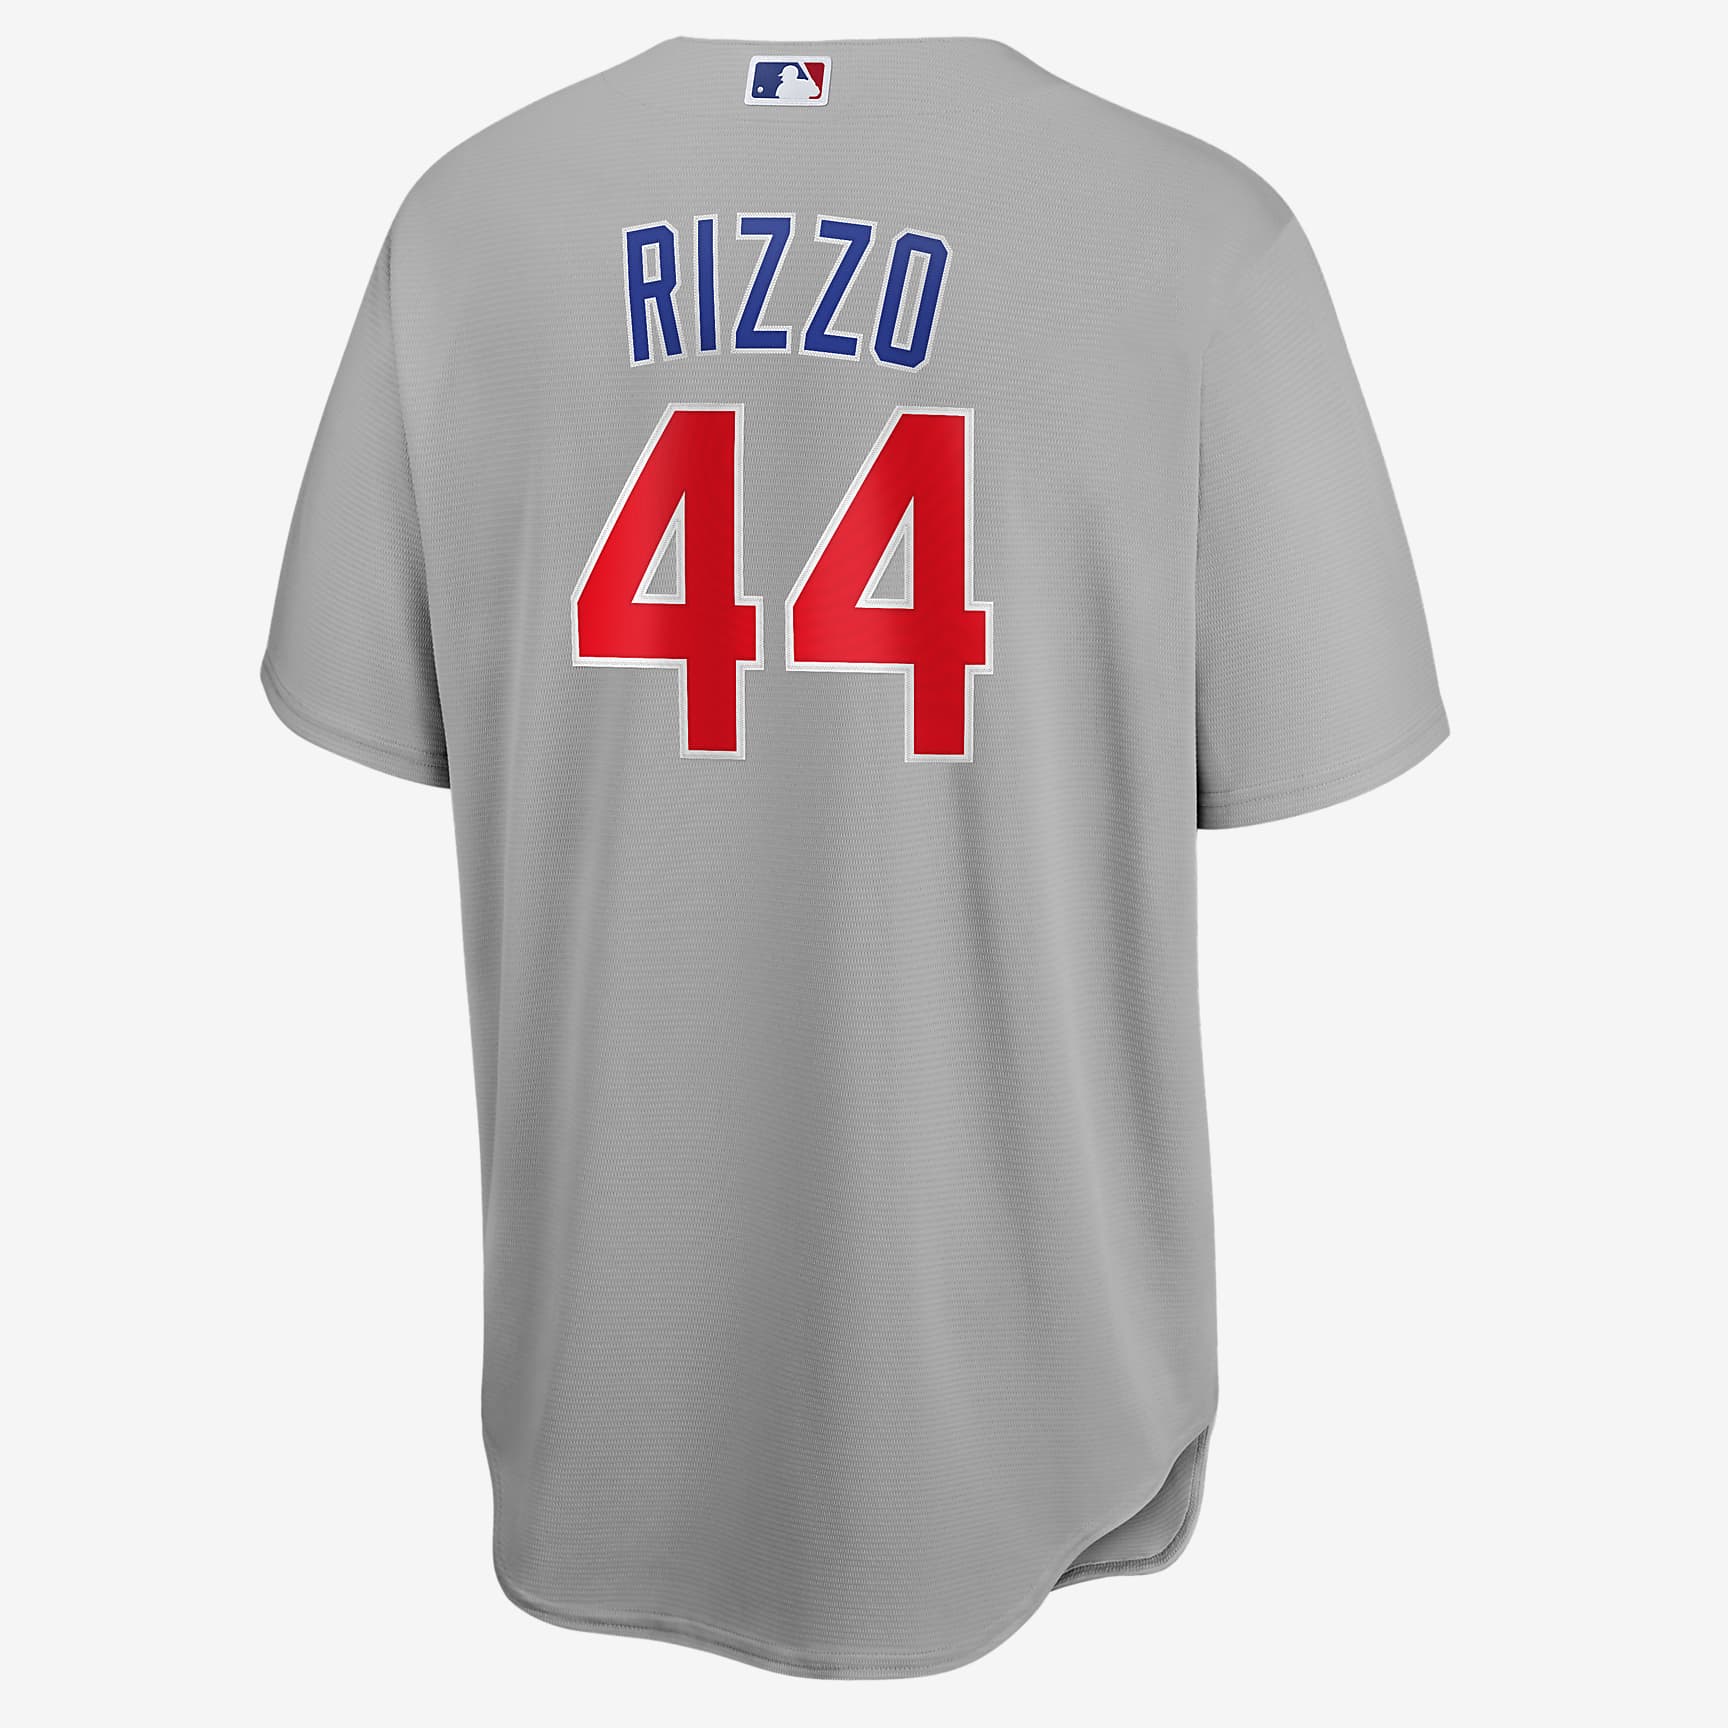 MLB Chicago Cubs (Anthony Rizzo) Men's Replica Baseball Jersey. Nike.com